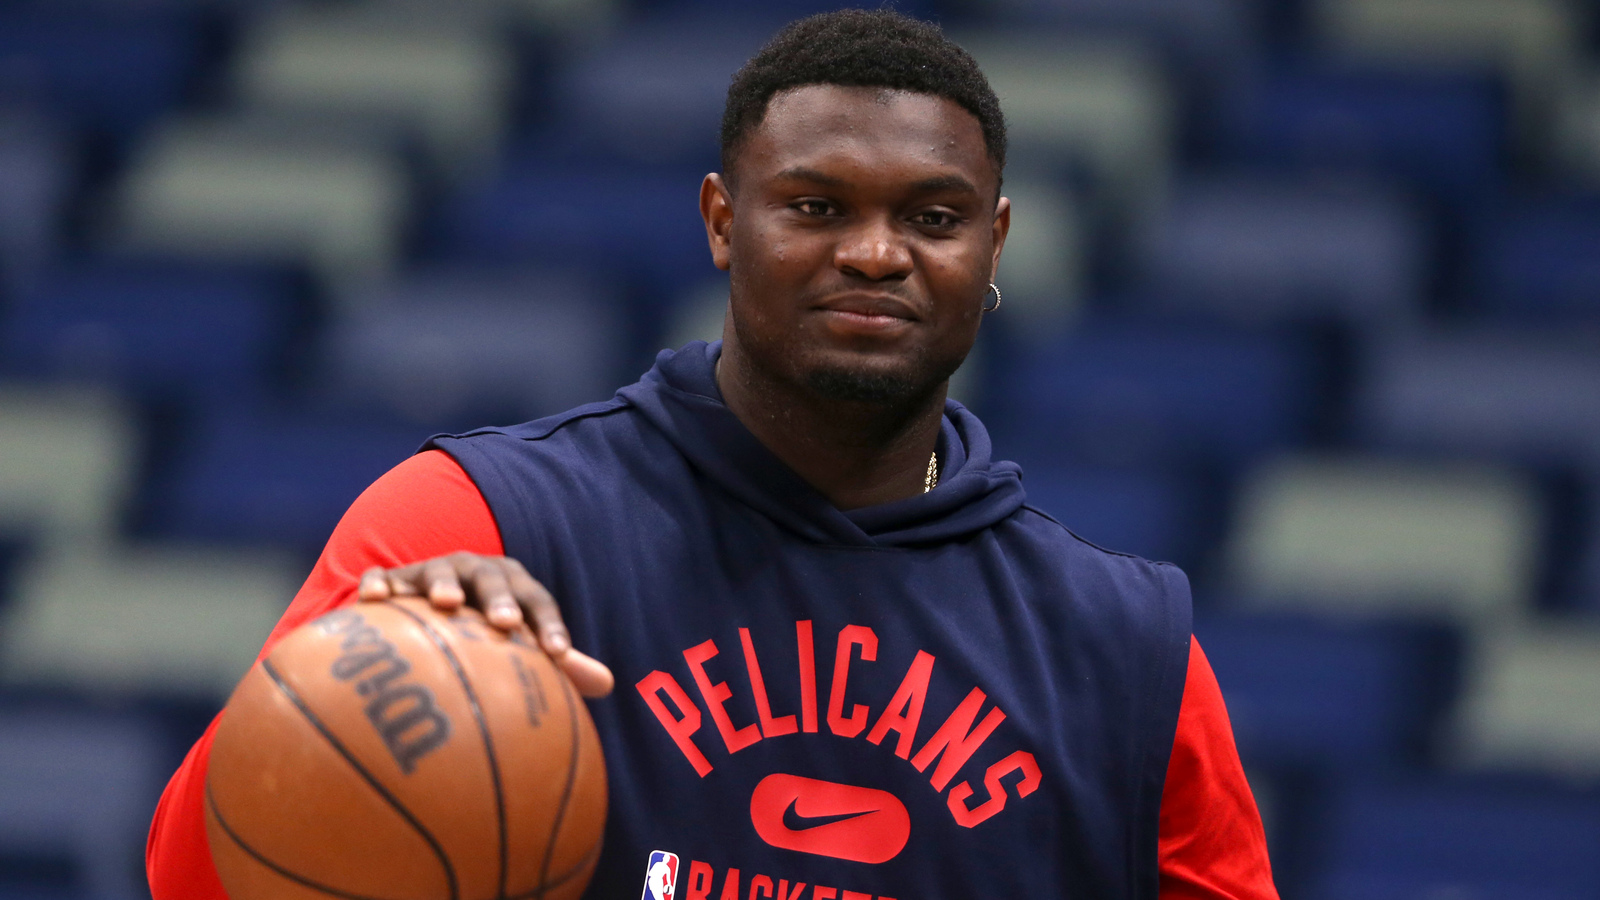 Pelicans, Zion Williamson nearing five-year rookie max extension worth up to $231 million